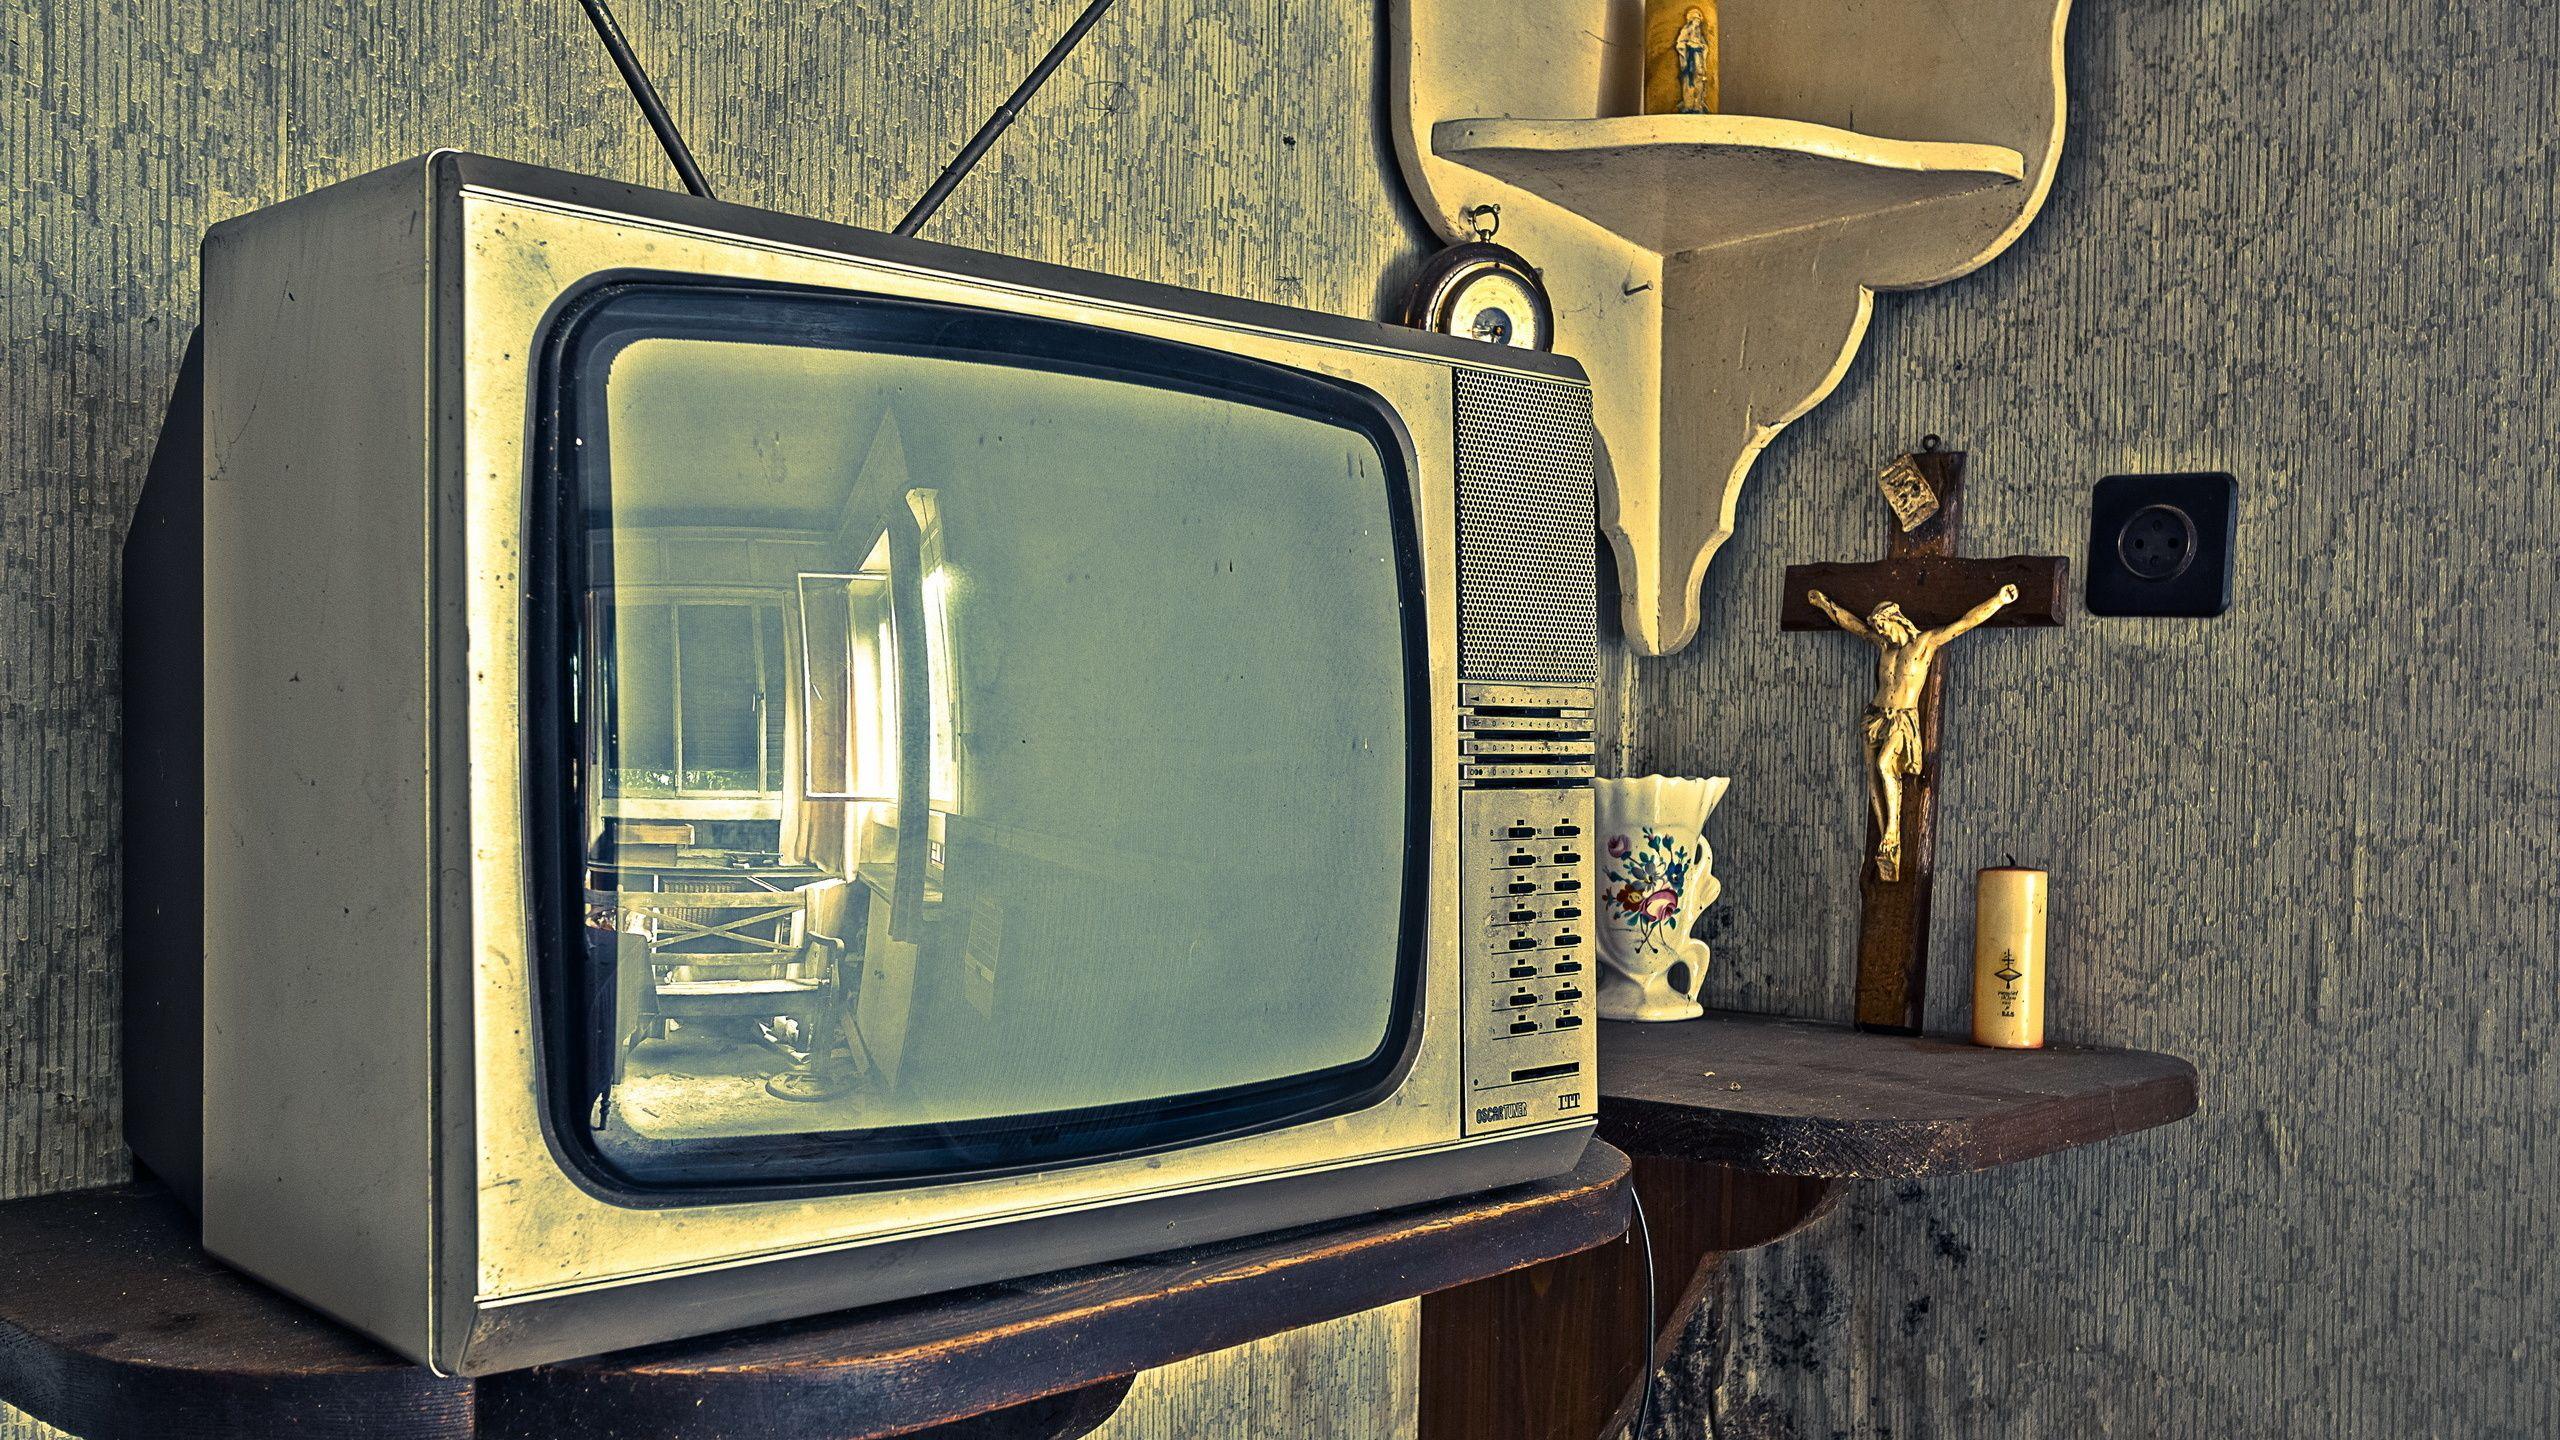 Antique TV Wallpapers - Top Free Antique Backgrounds WallpaperAccess